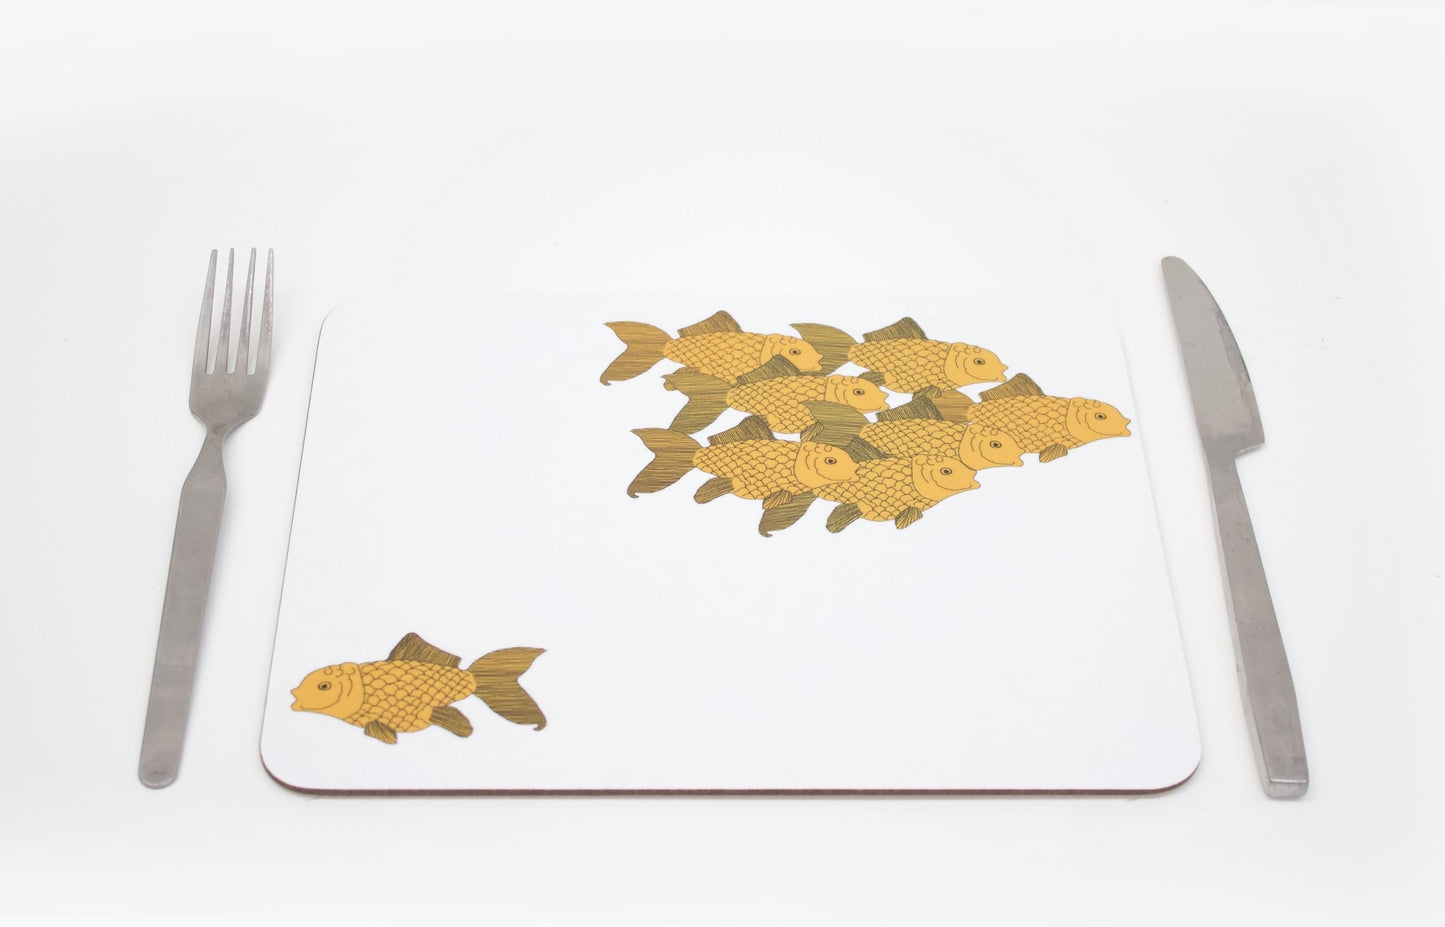 The Anarchist Goldfish Placemat